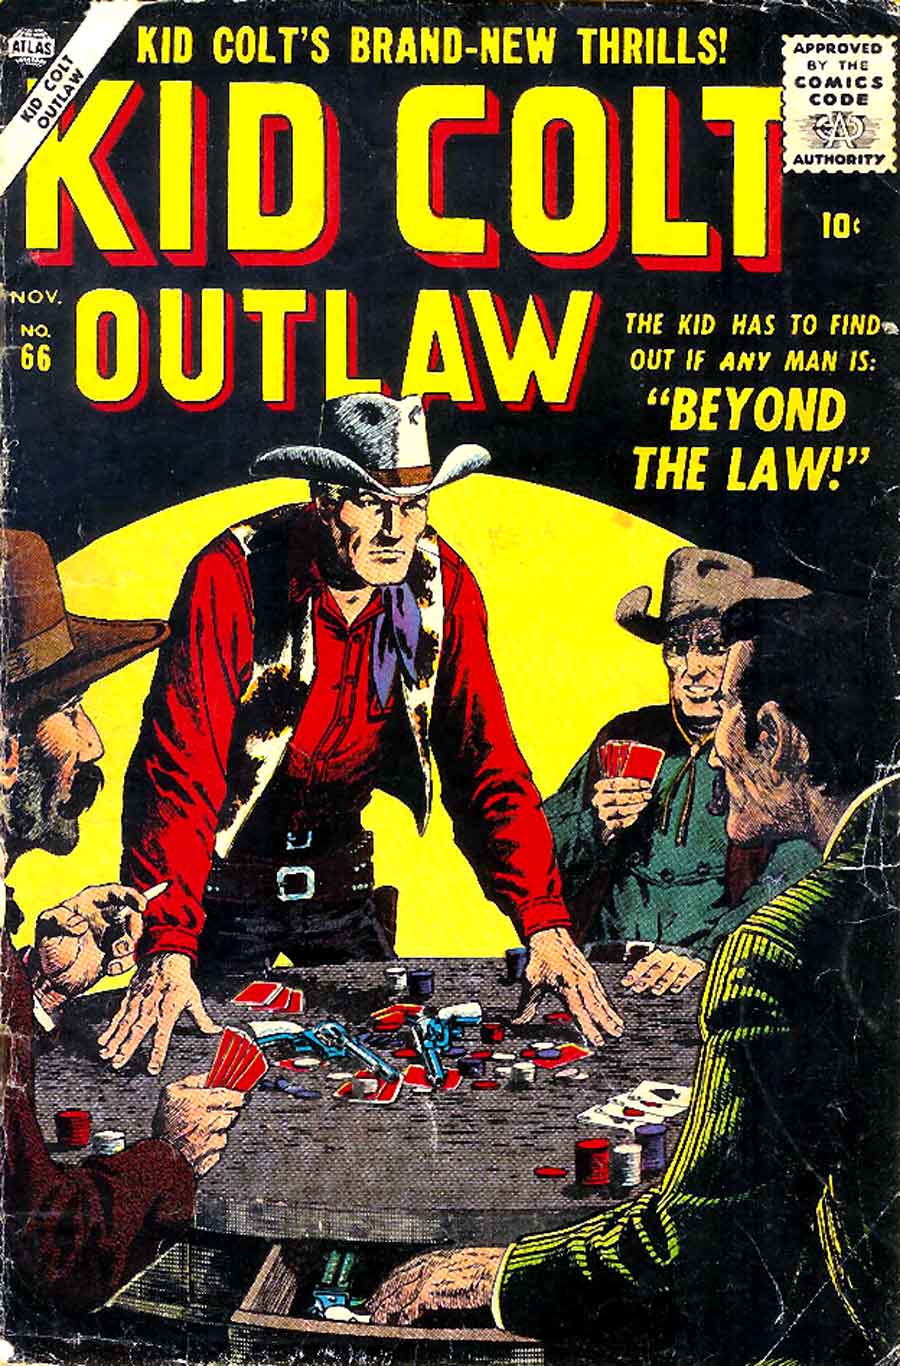 Kid Colt Outlaw #66 cover